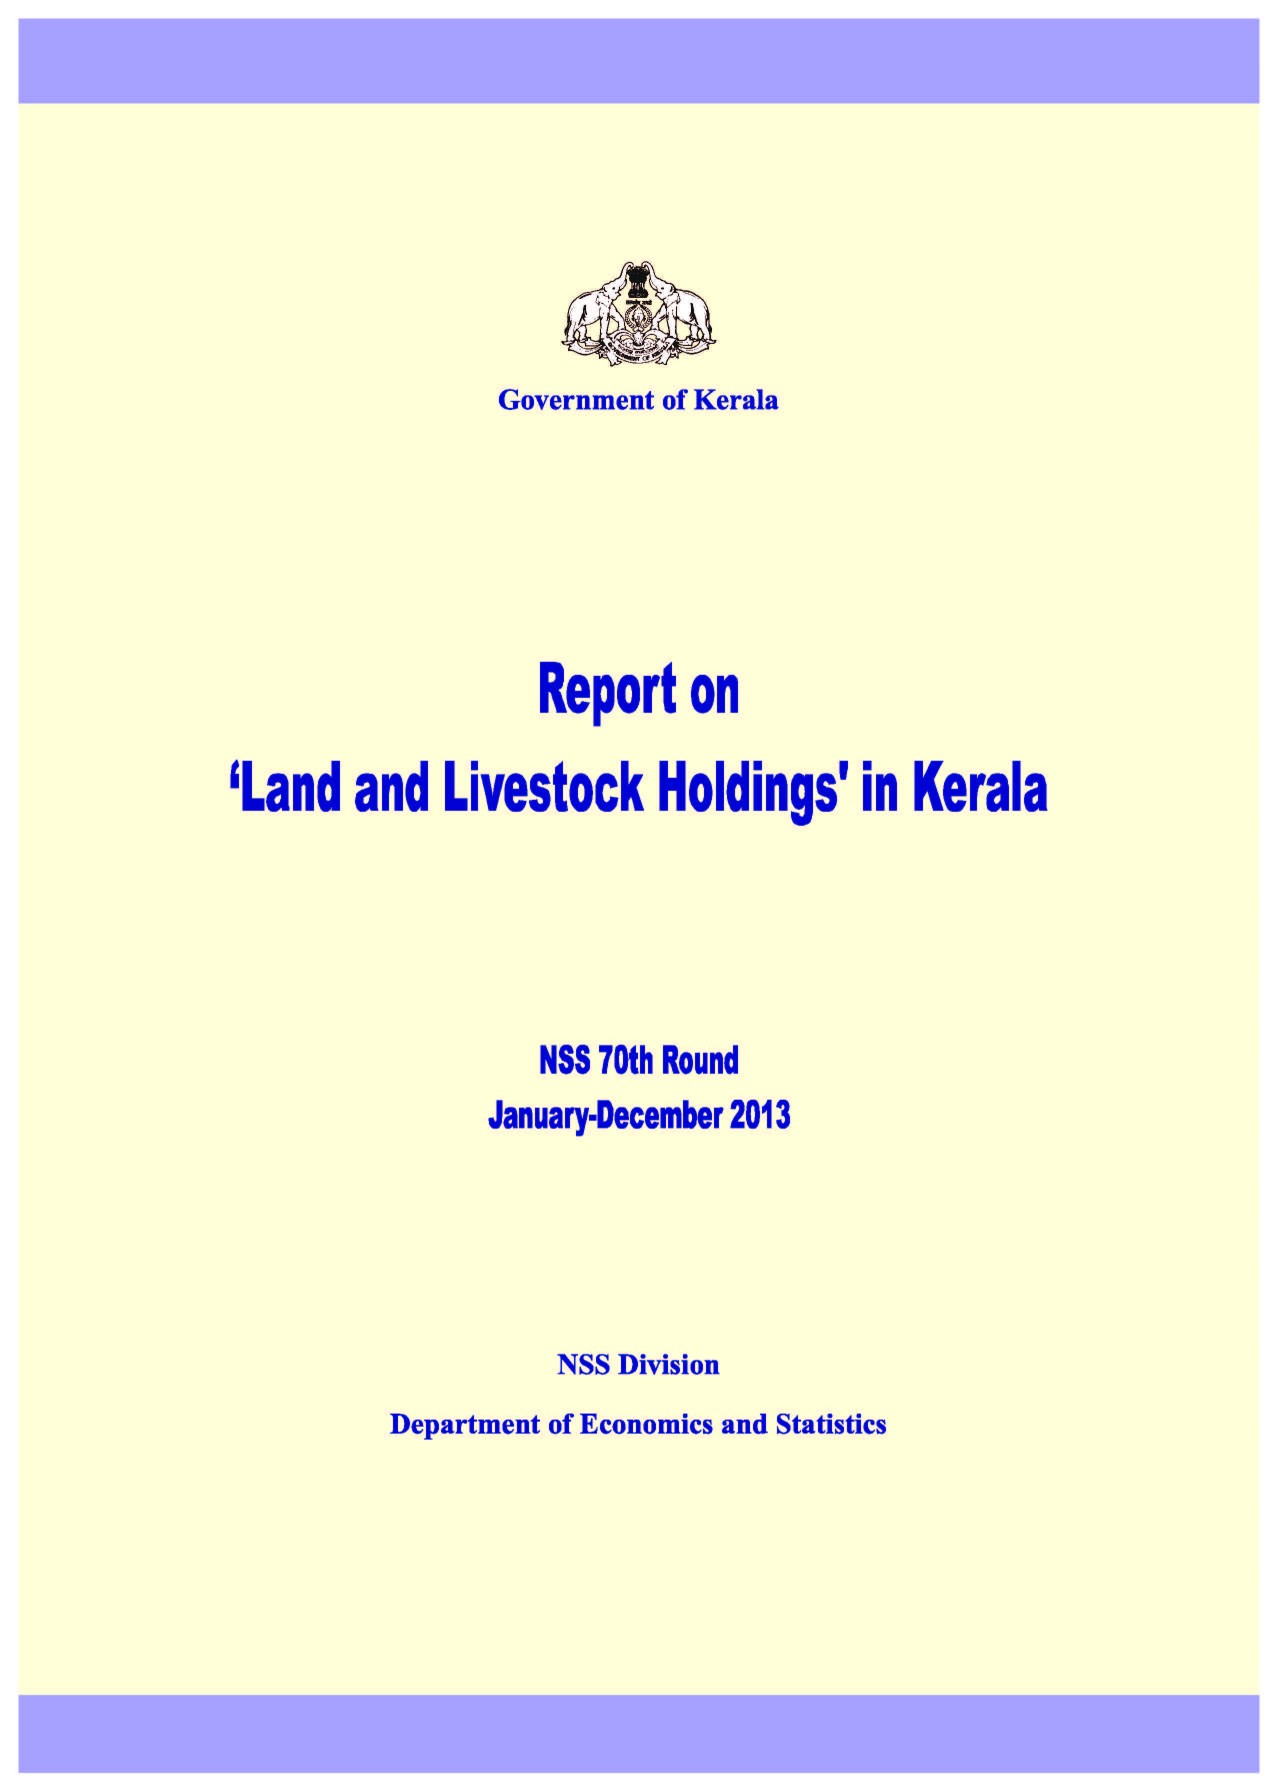 Report on Land and Livestock Holdings in Kerala